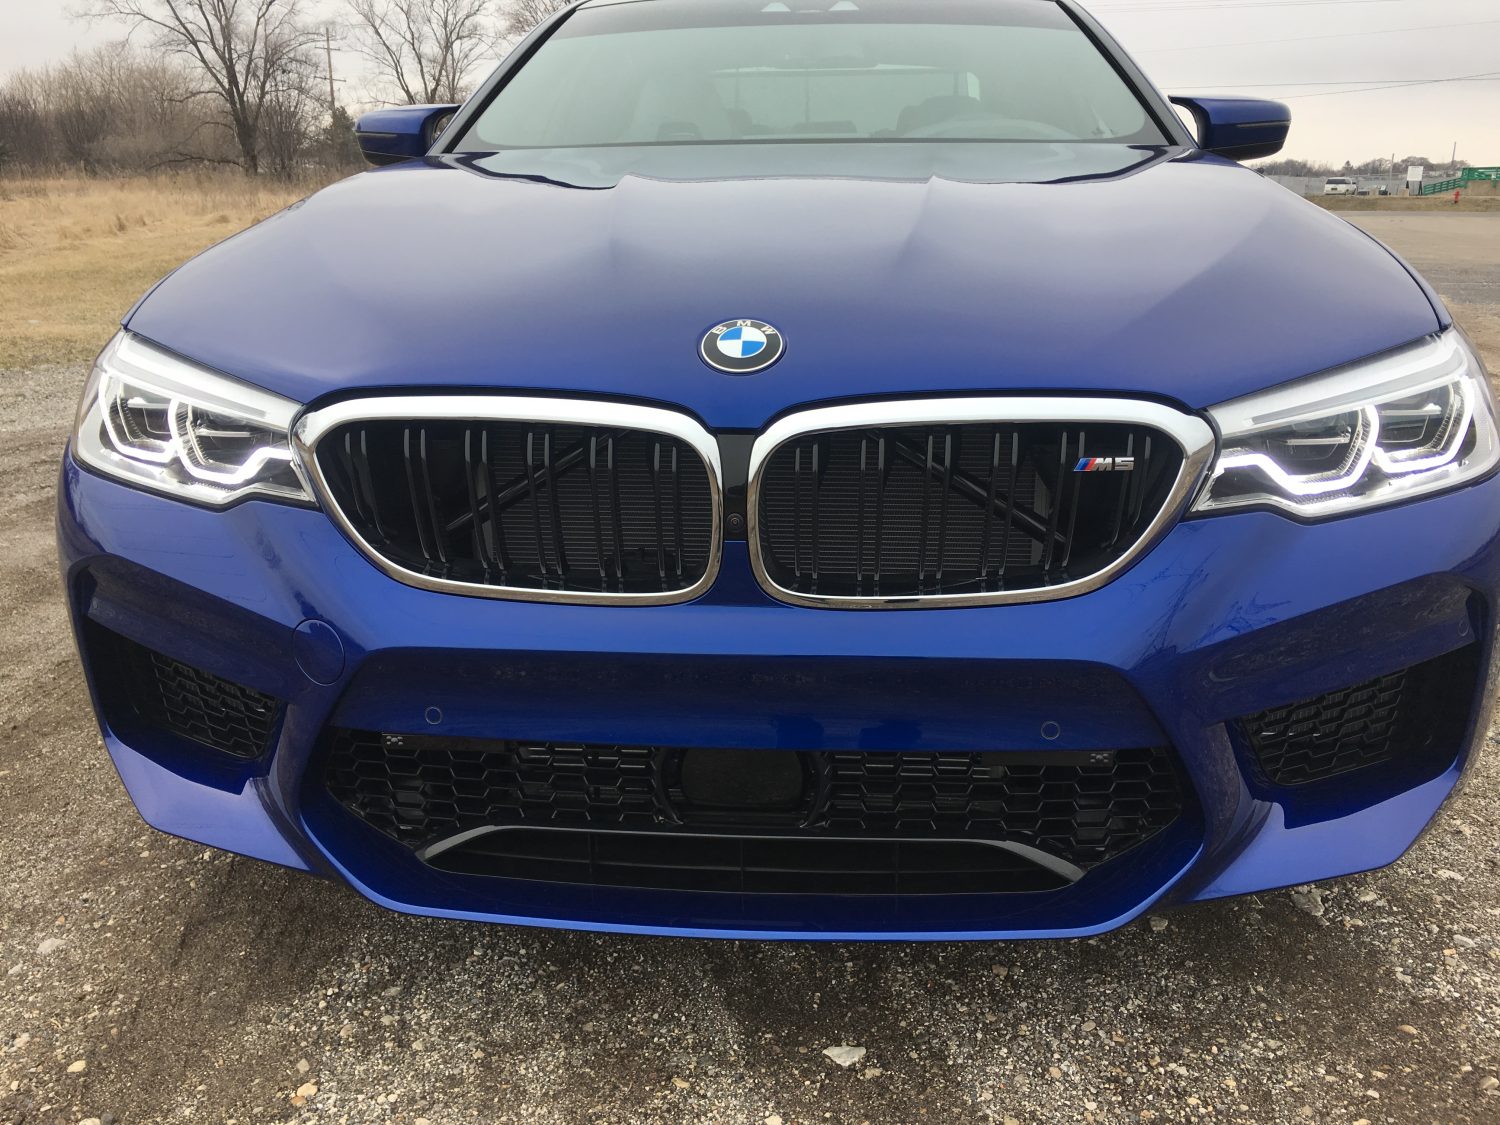 K40 laser jammers on a 2018 BMW M5